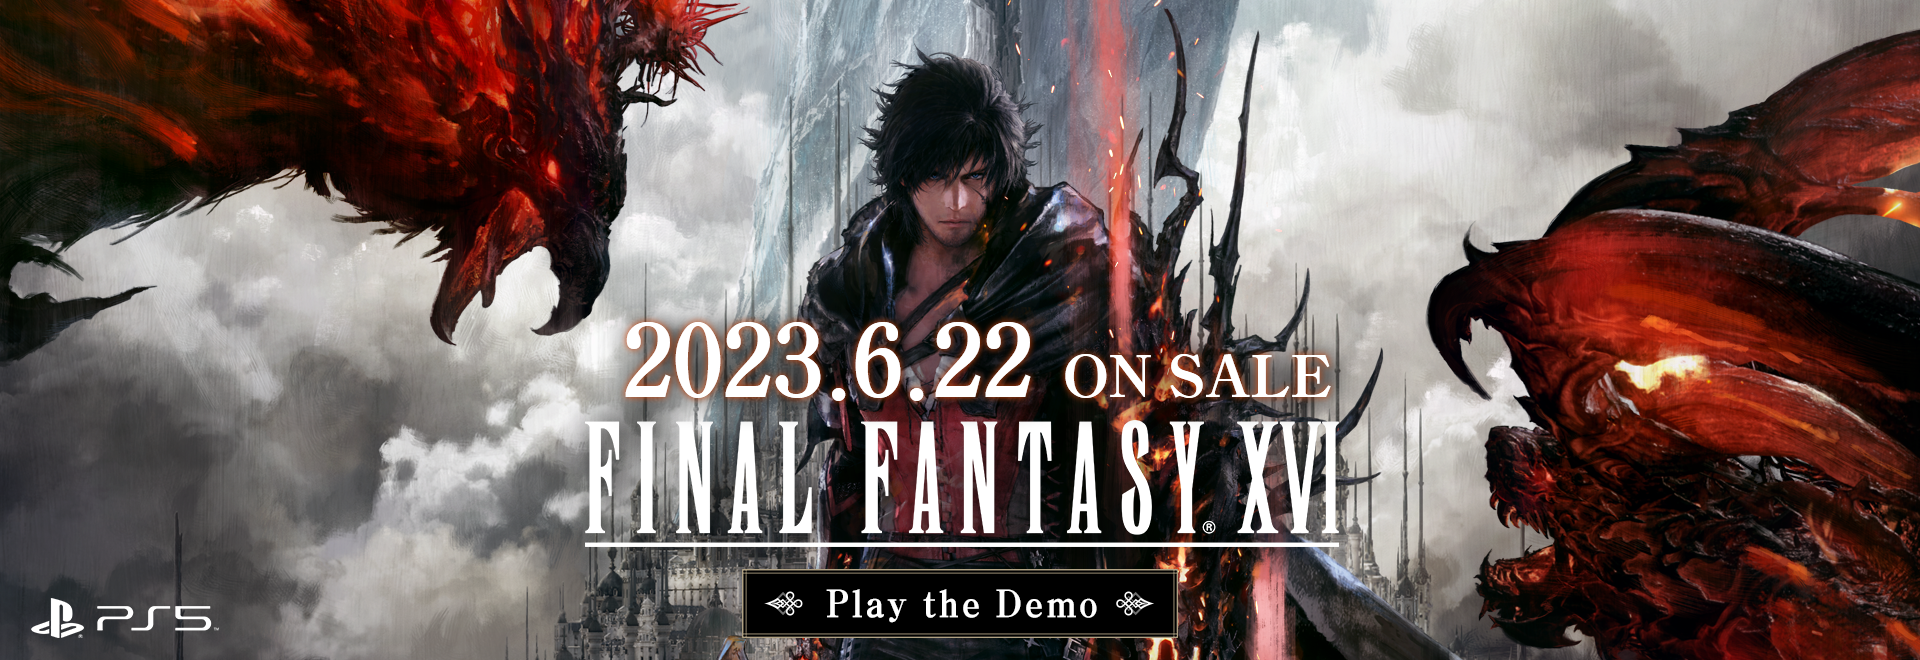 Demonstration of Login Issues - Square Enix Account 